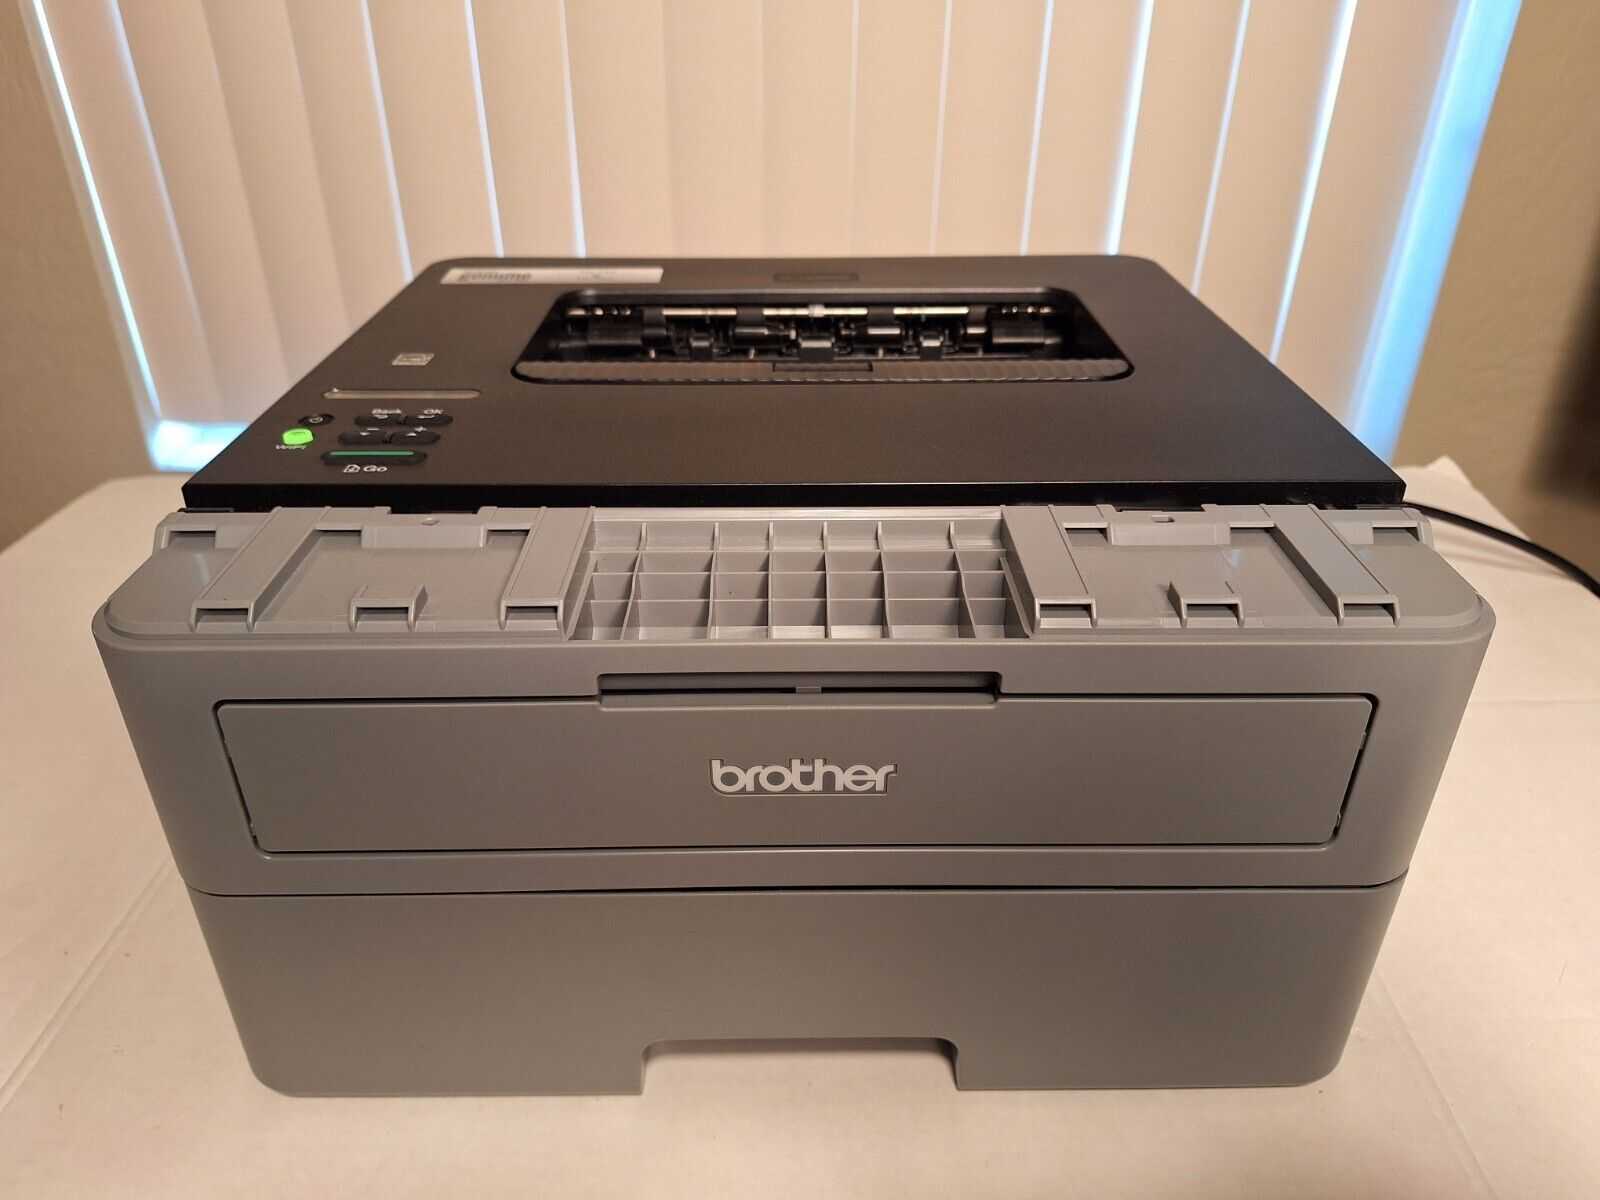 Brother HL-L2350DW Printer Monochrome Wifi - missing top panel